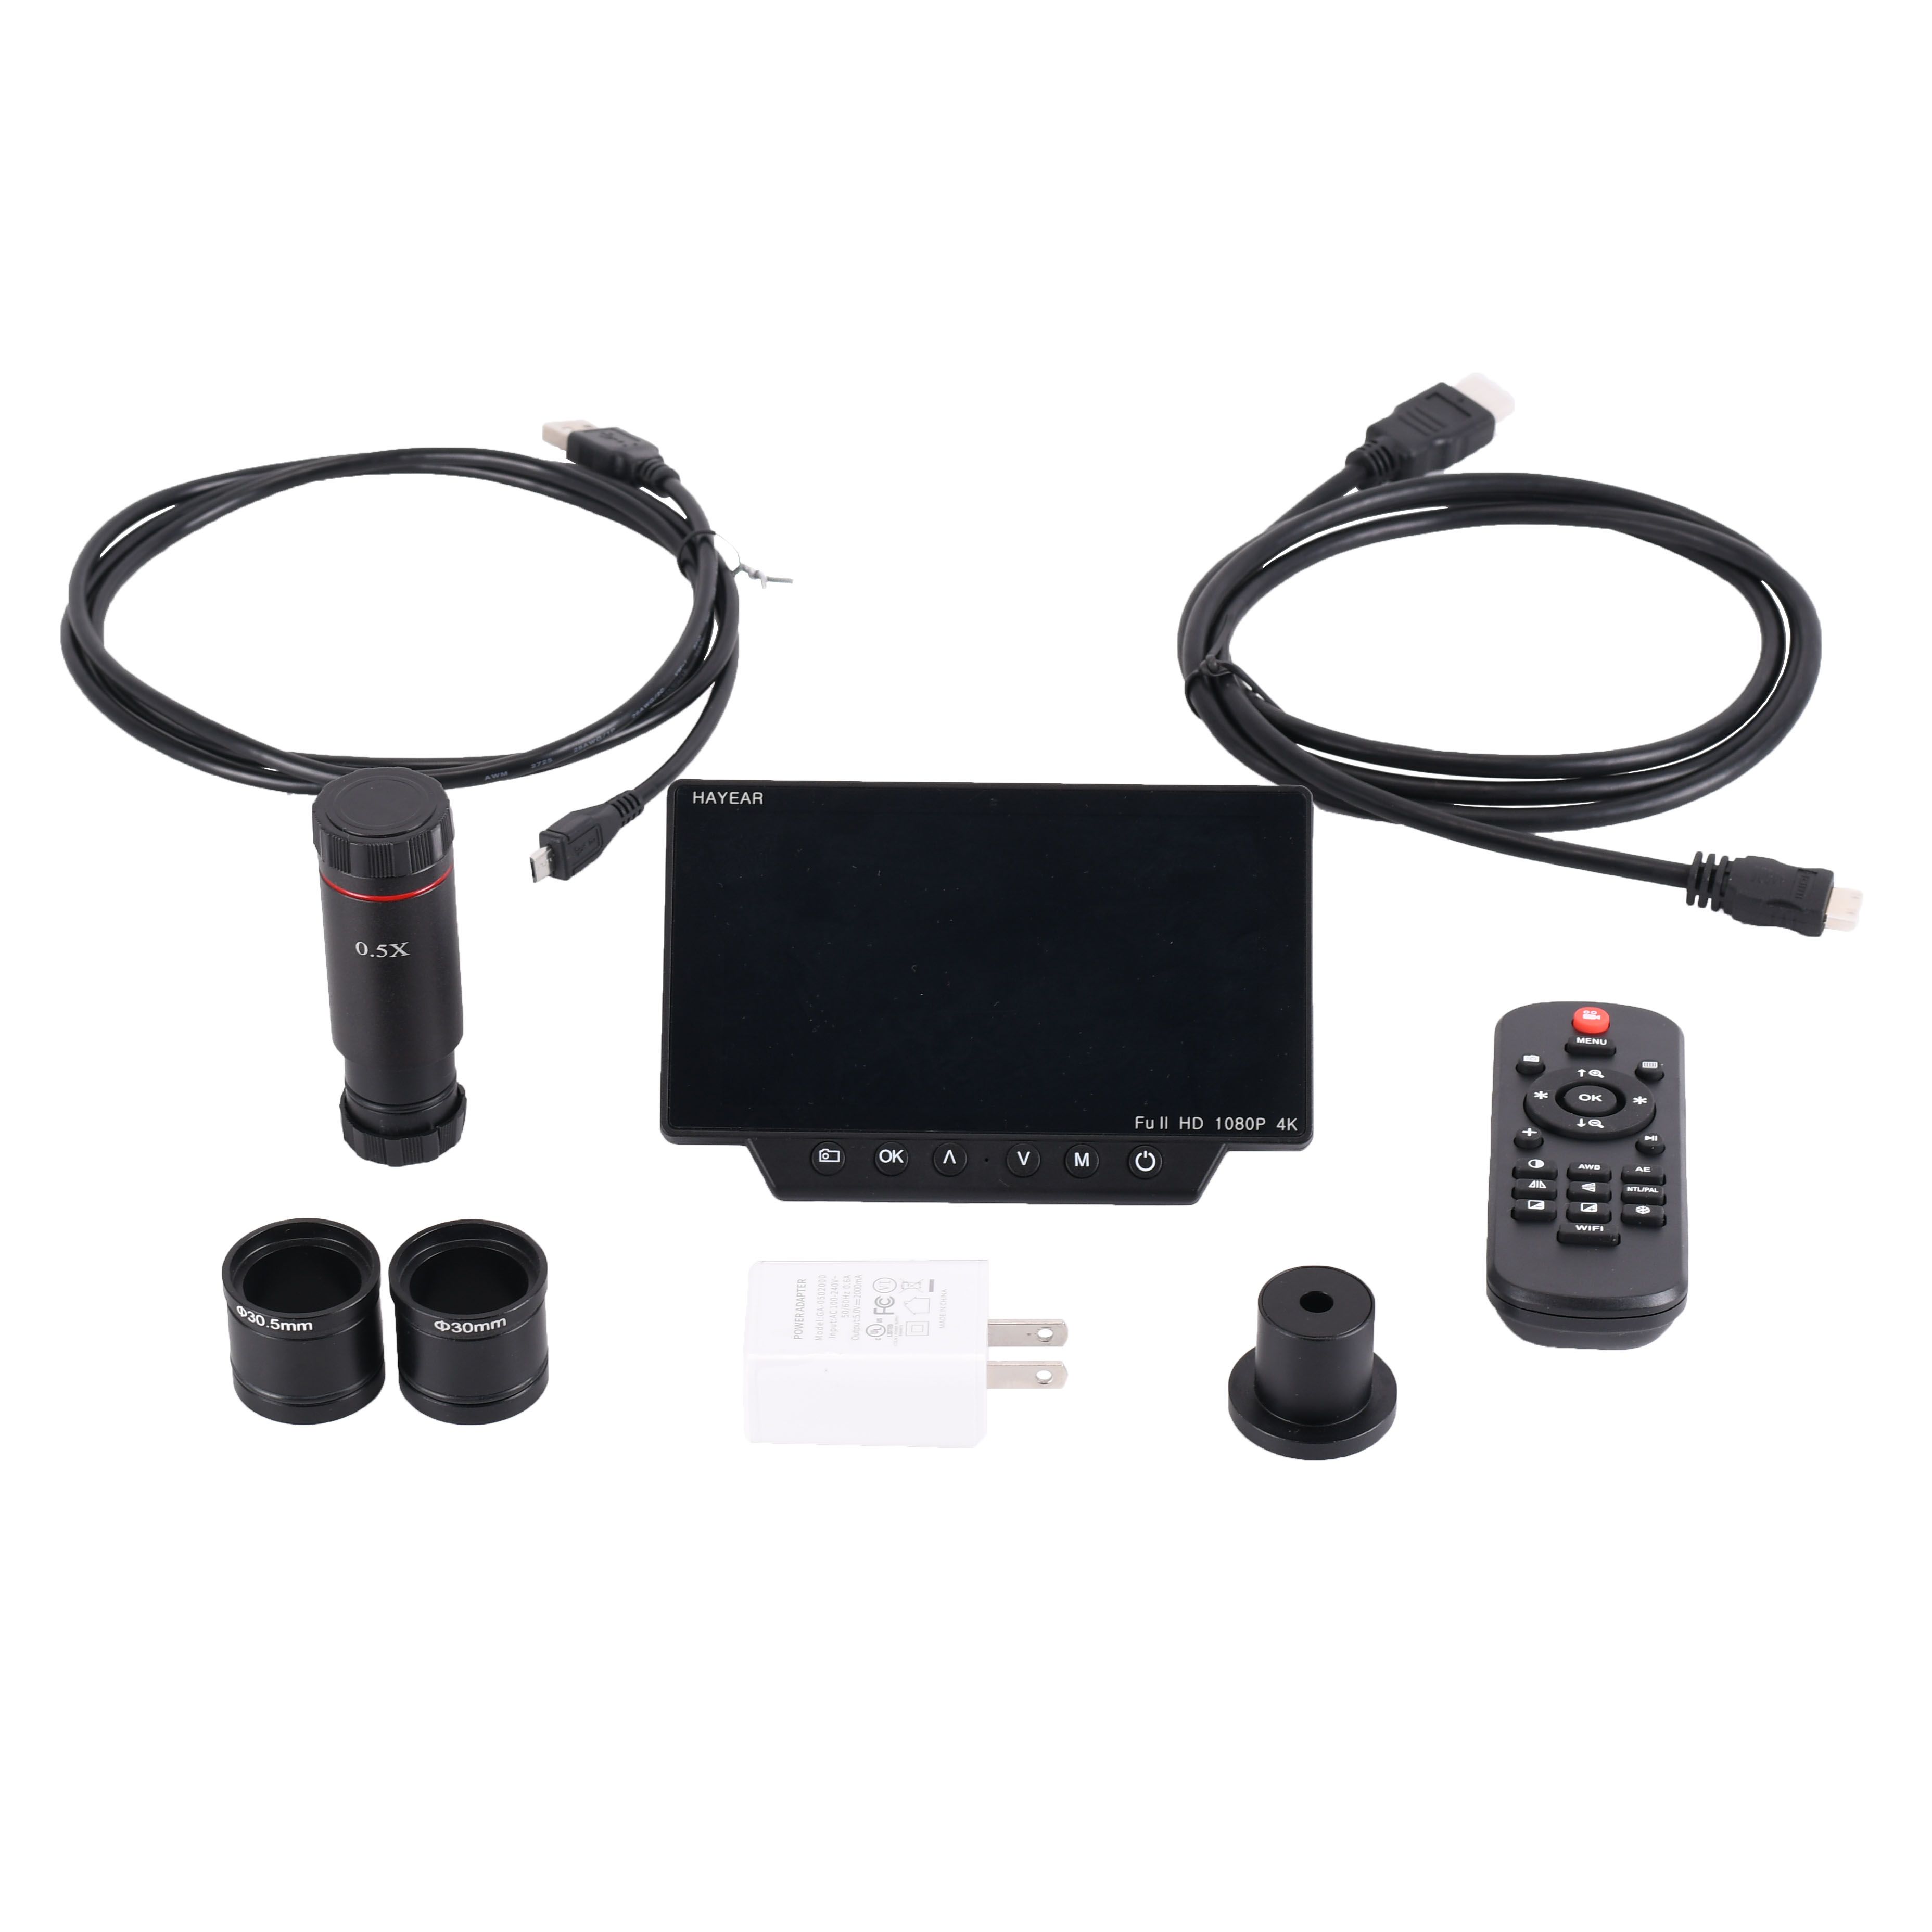 HAYEAR-HY-1070-Microscope-16-Megapixel-4K-1080P-USB-Support-WIFI-Connection-Digital-Microscope-with--1558908